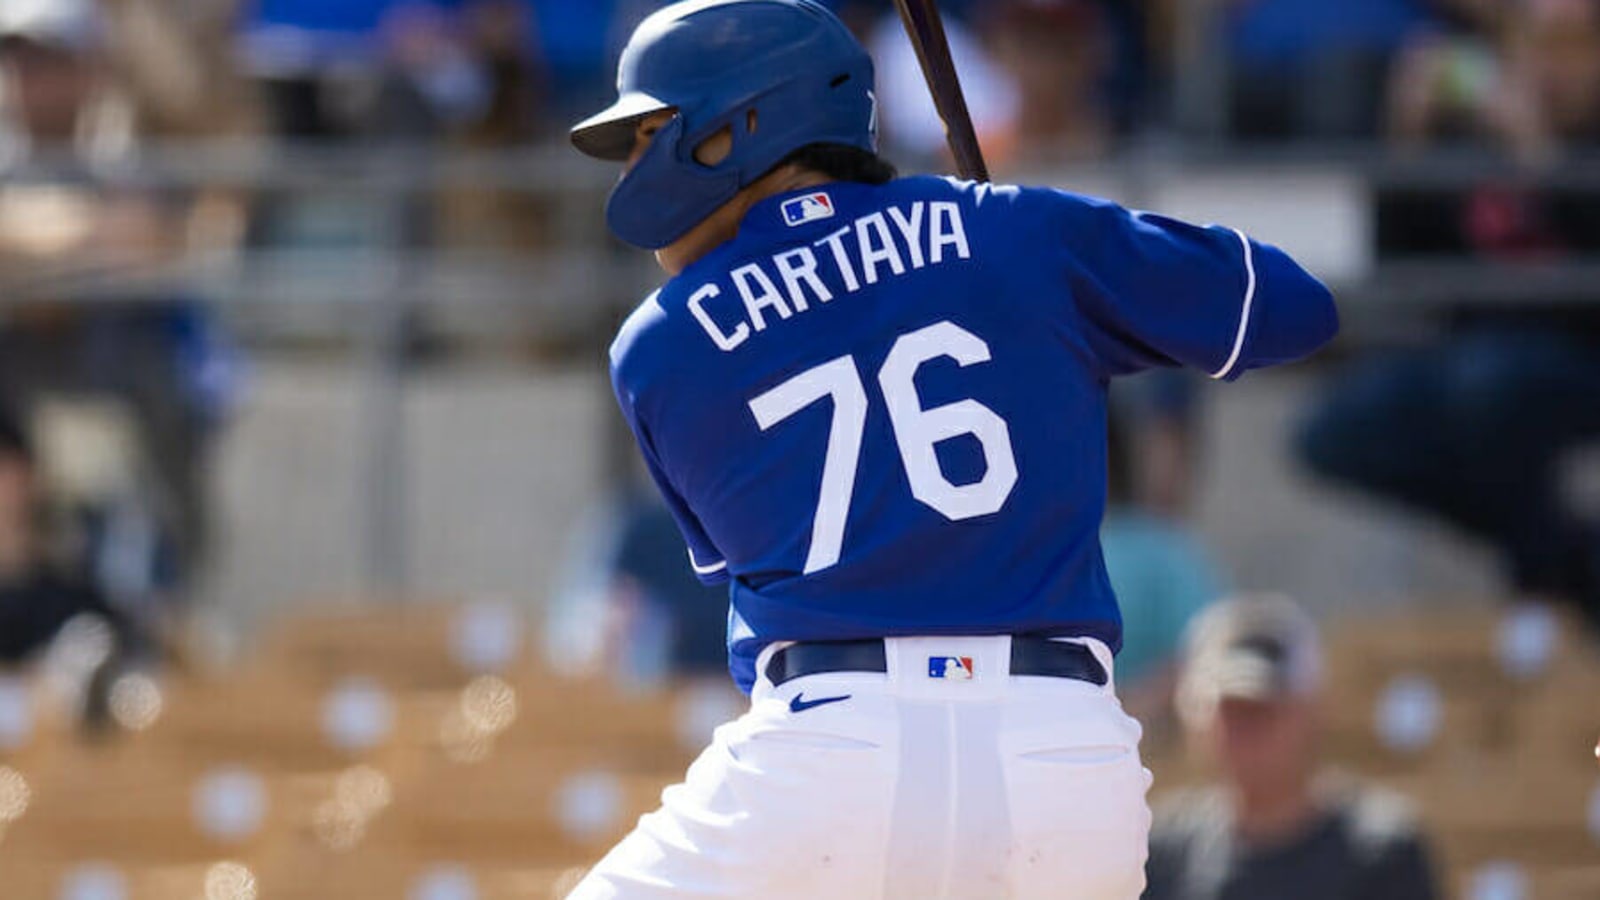 Dodgers players impressing in Spring Training